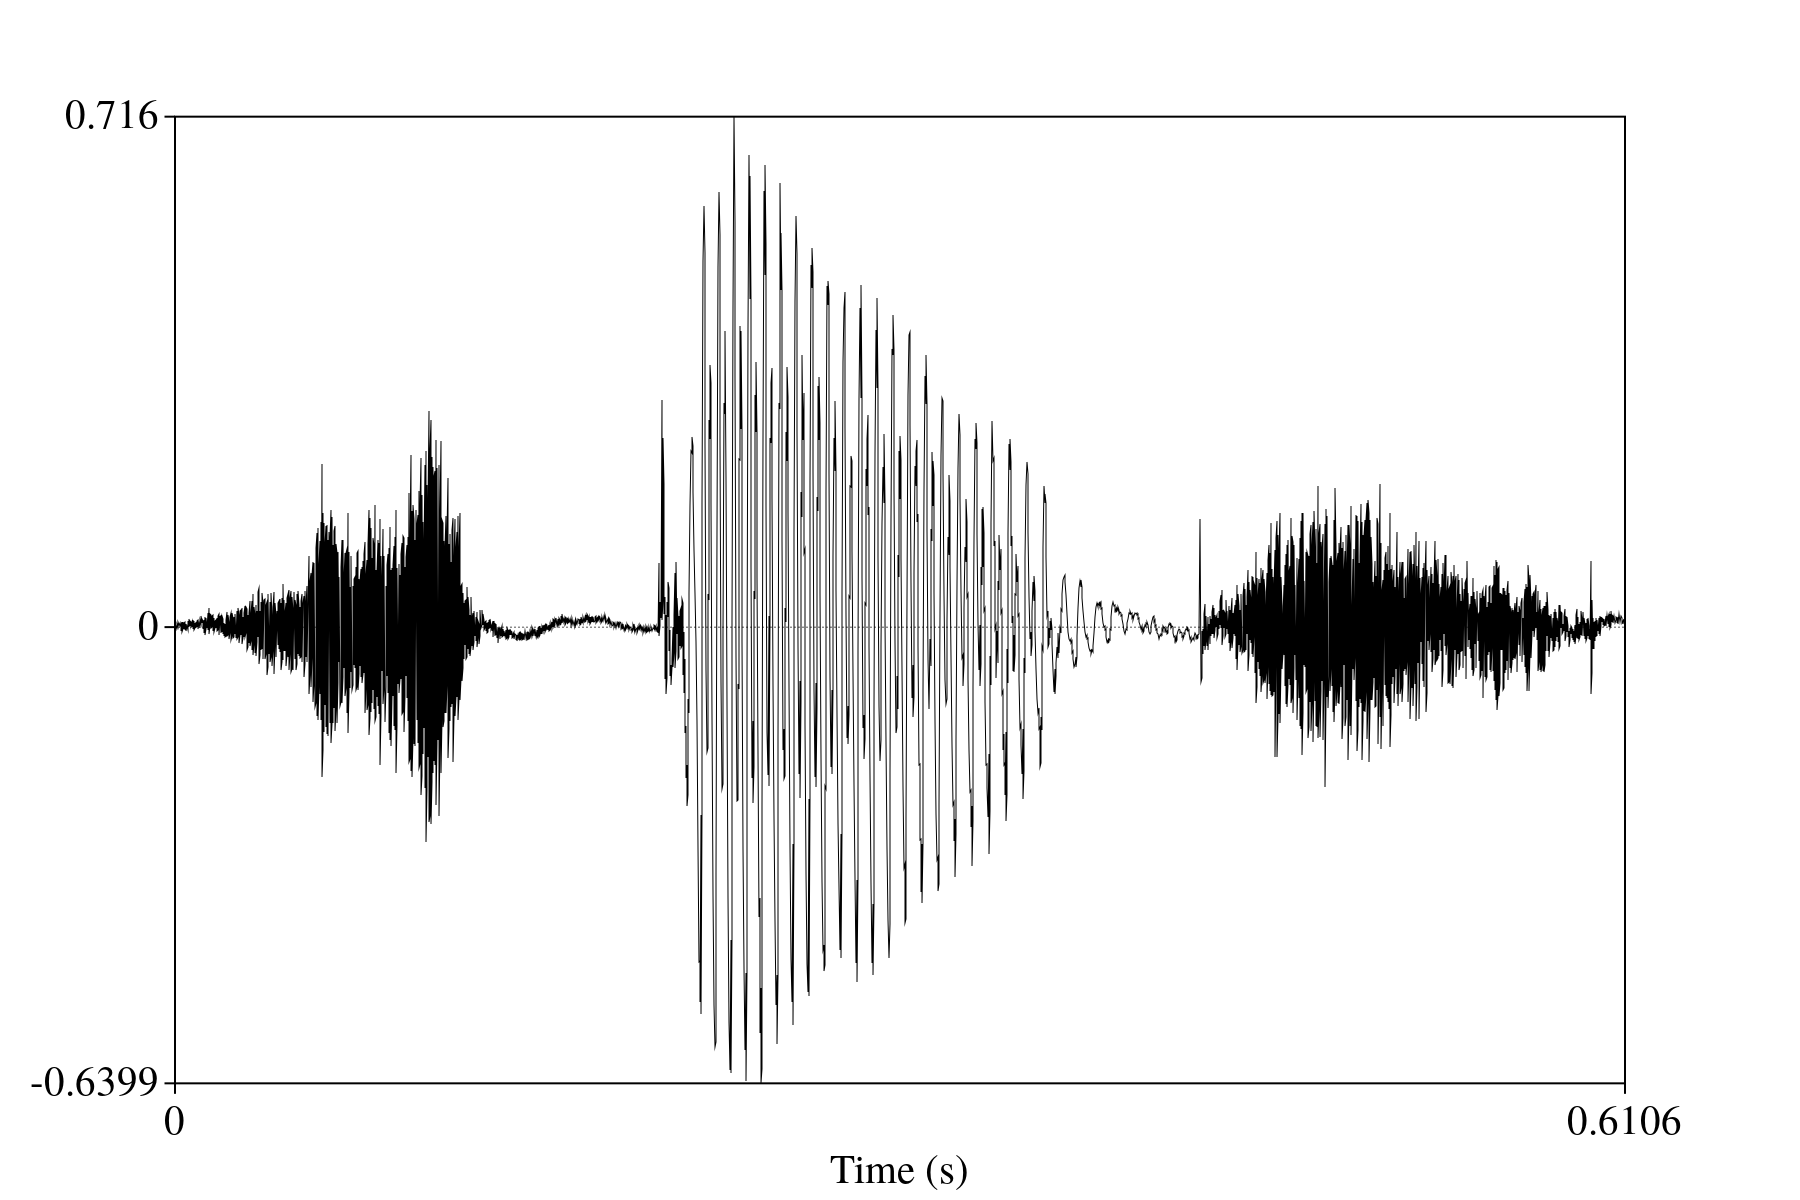 Figure 2: Waveform of a recording of me saying "speech"